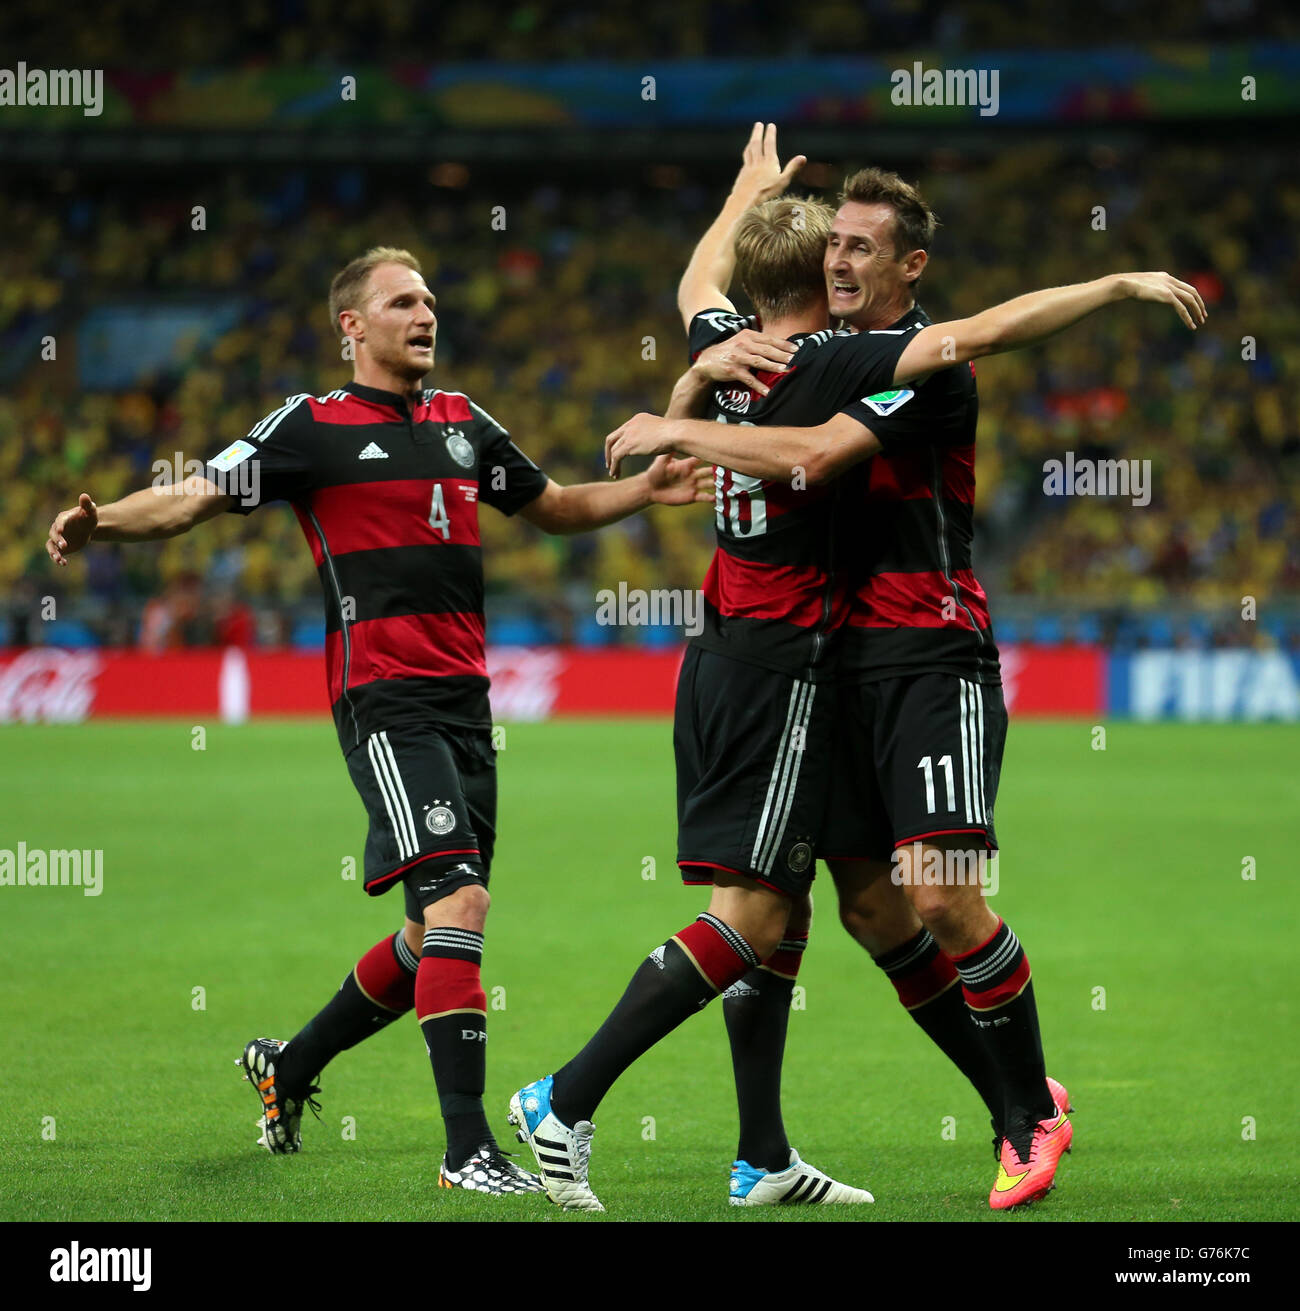 Germany's Toni Kroos celebrates scoring his side's third goal of the game with teammate Germany's Miroslav Klose (right) during the FIFA World Cup Semi Final at Estadio Mineirao, Belo Horizonte, Brazil. Stock Photo